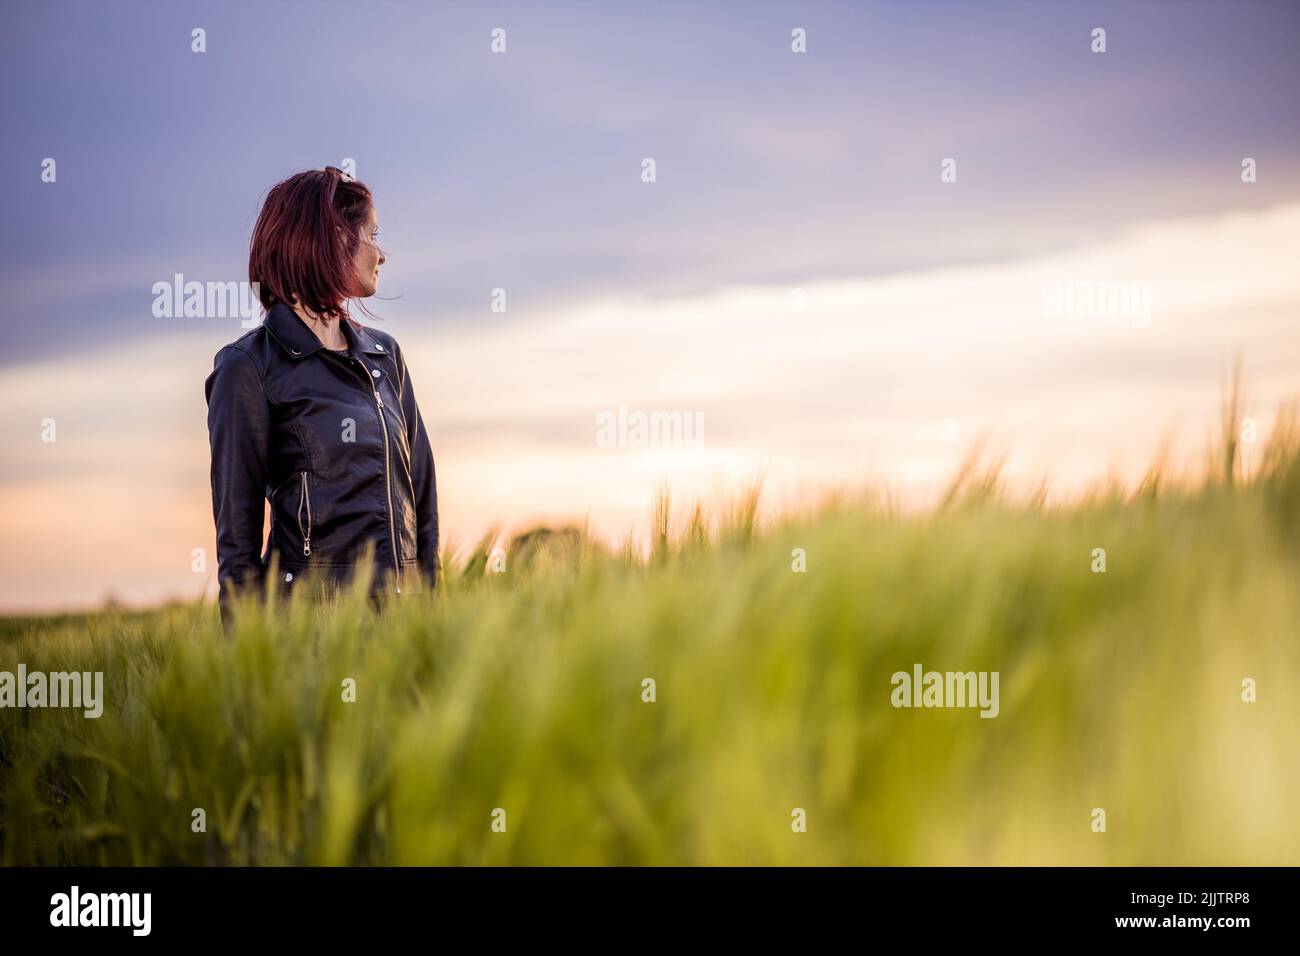 The young woman in a leather jacket standing in the green field looking to the left. Stock Photo